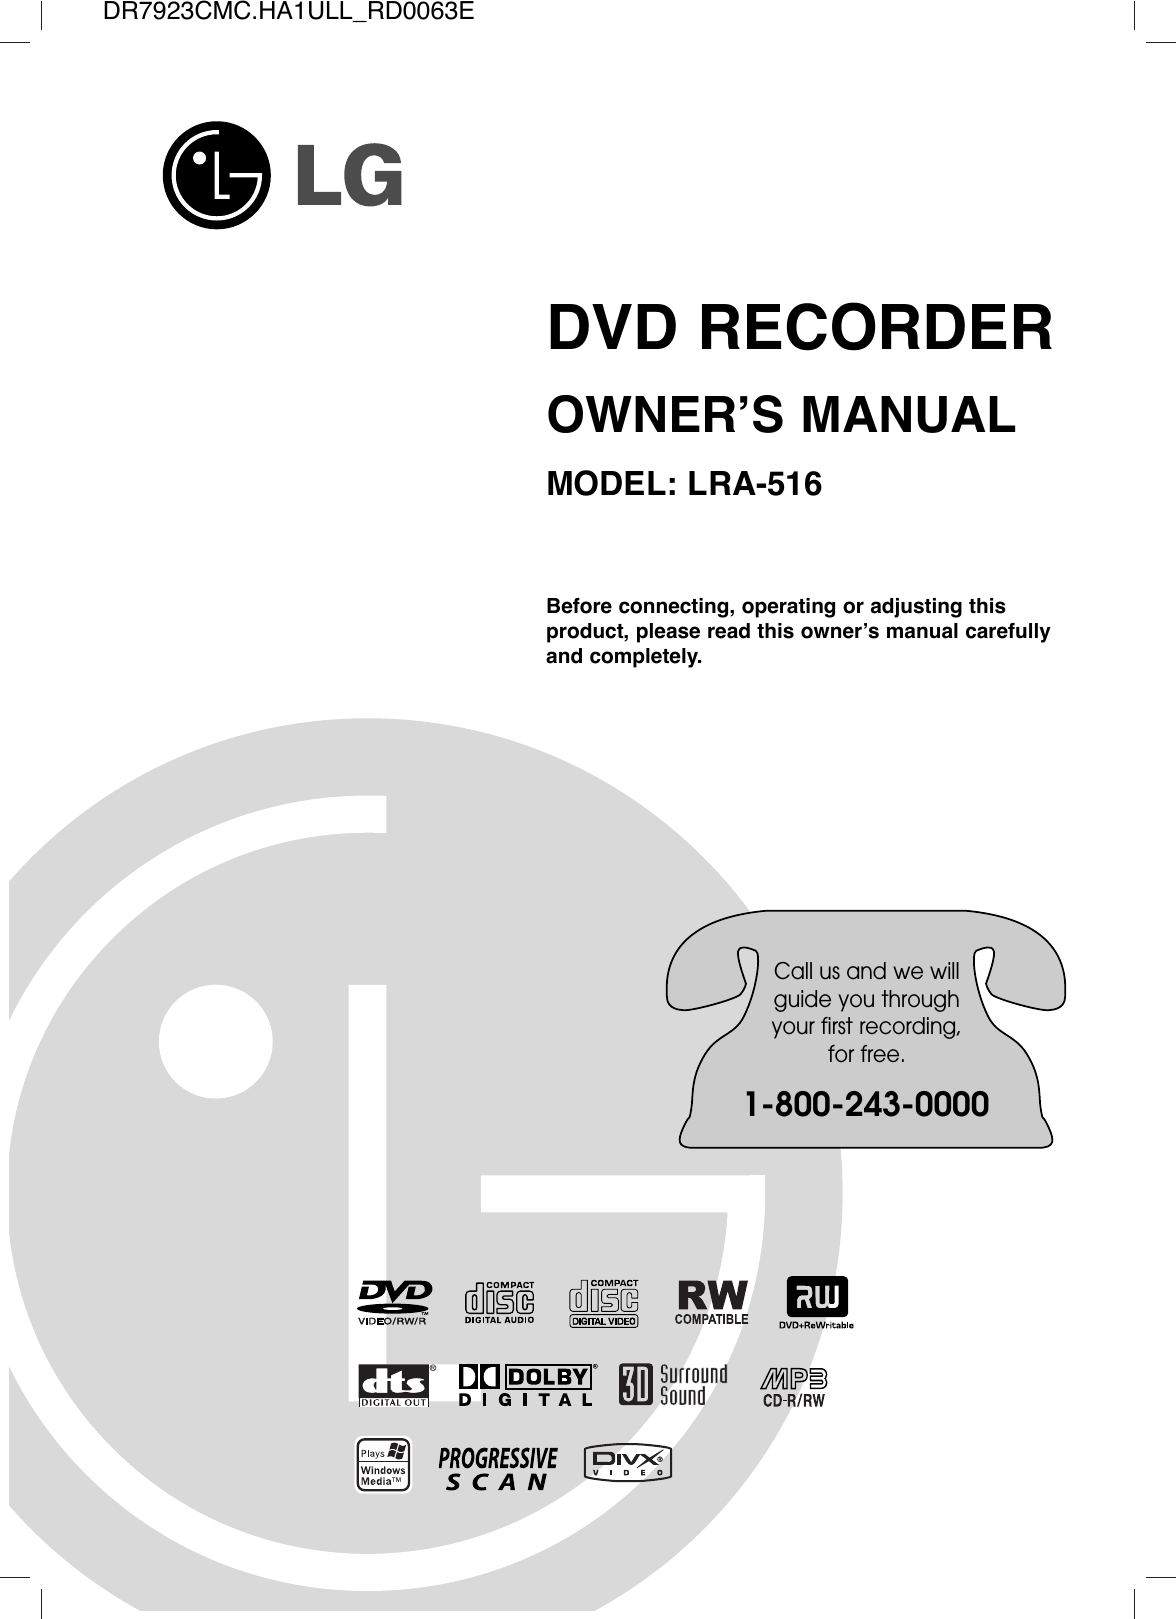 DR7923CMC.HA1ULL_RD0063EBefore connecting, operating or adjusting this product, please read this owner’s manual carefully and completely.DVD RECORDEROWNER’S MANUALMODEL: LRA-516Call us and we willguide you throughyour first recording,for free.1-800-243-0000